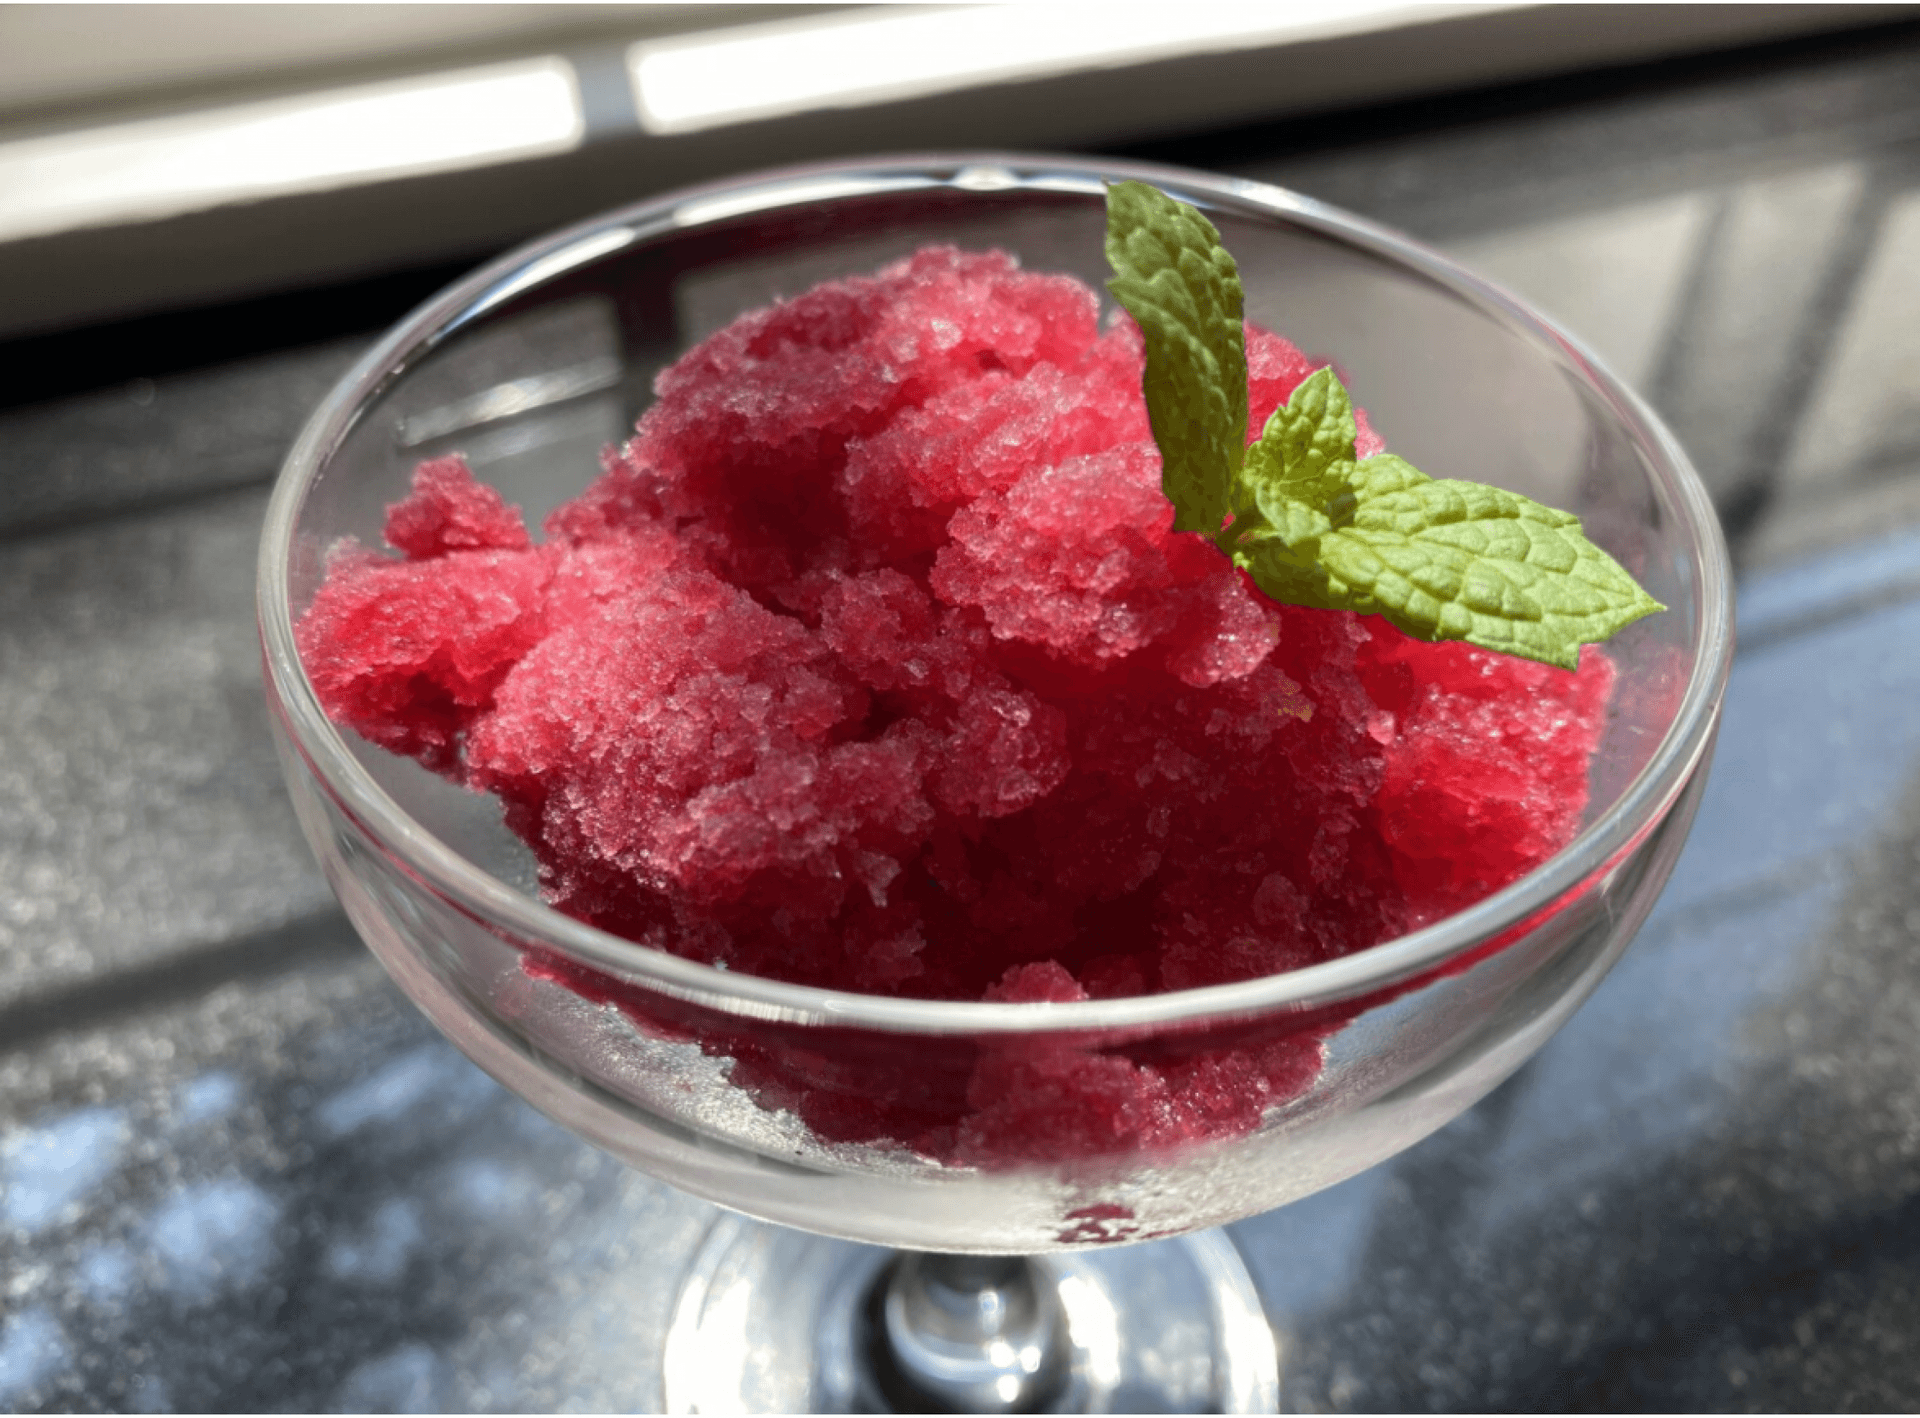 Summery red dessert in a glass